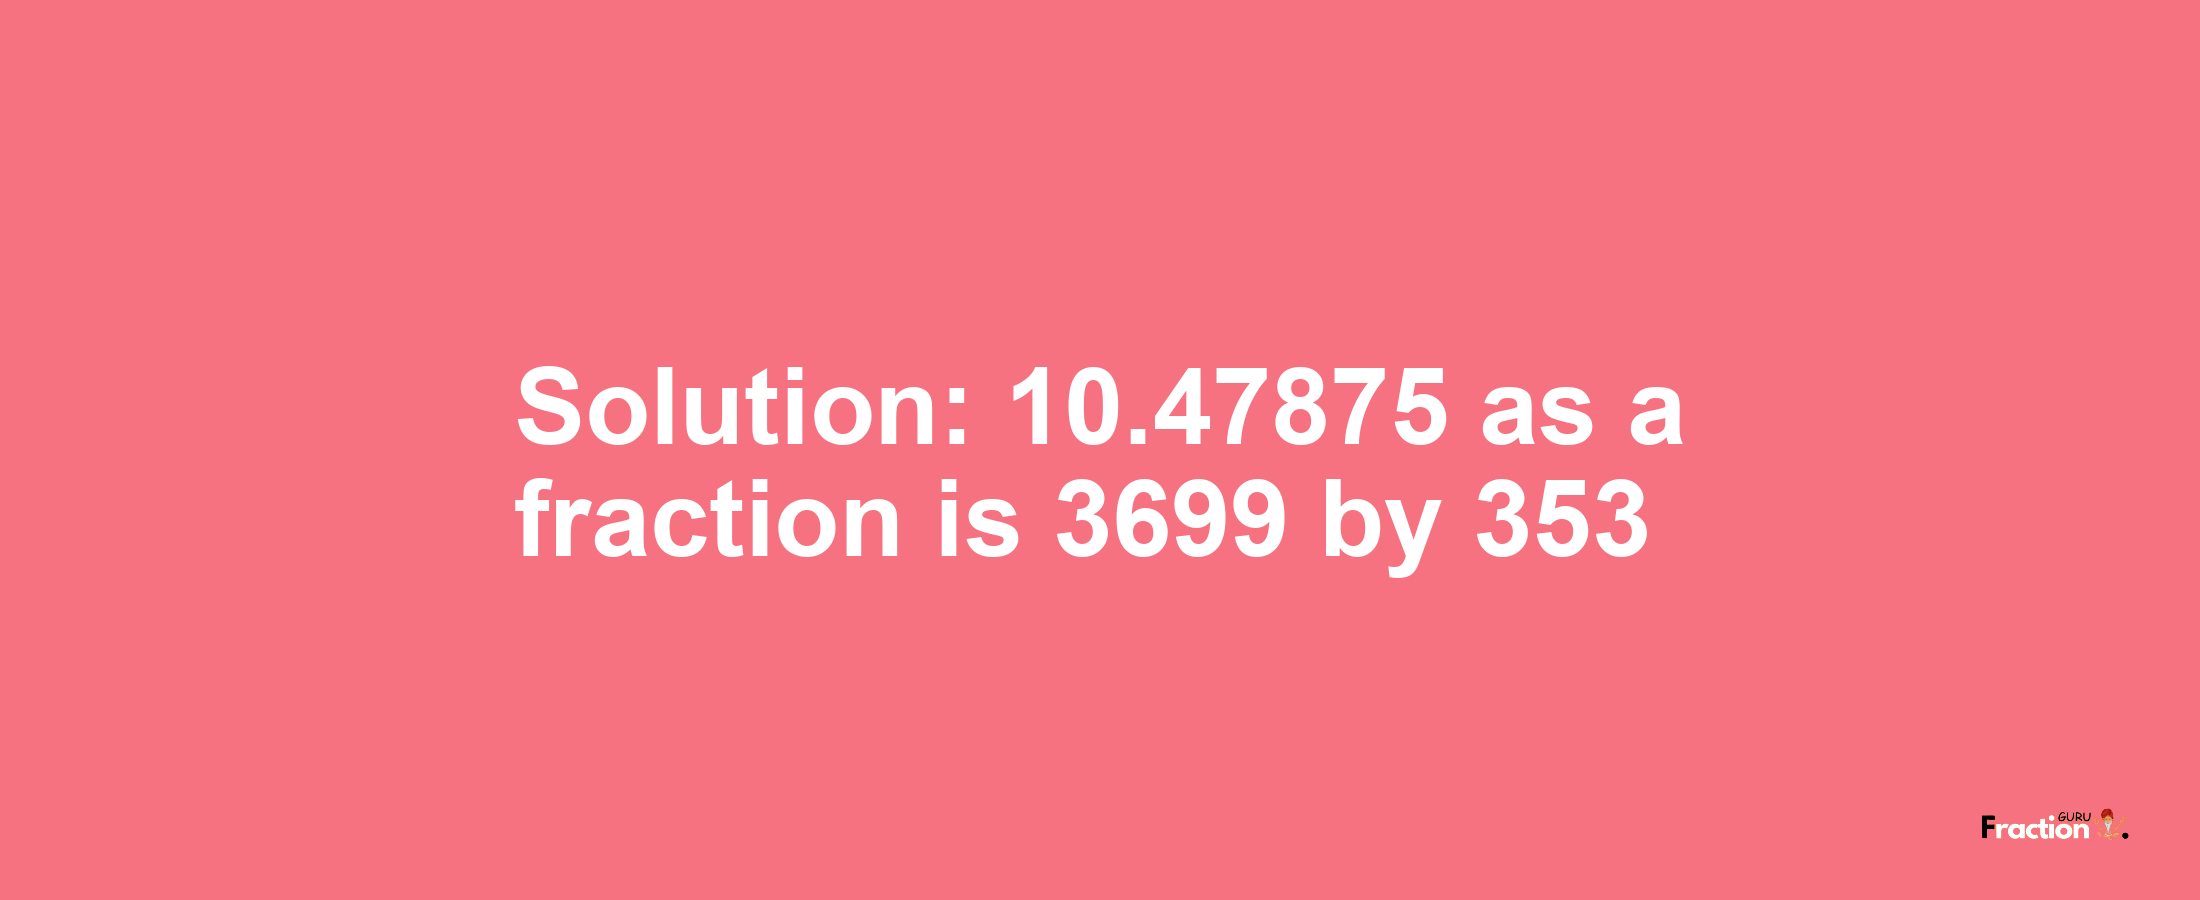 Solution:10.47875 as a fraction is 3699/353